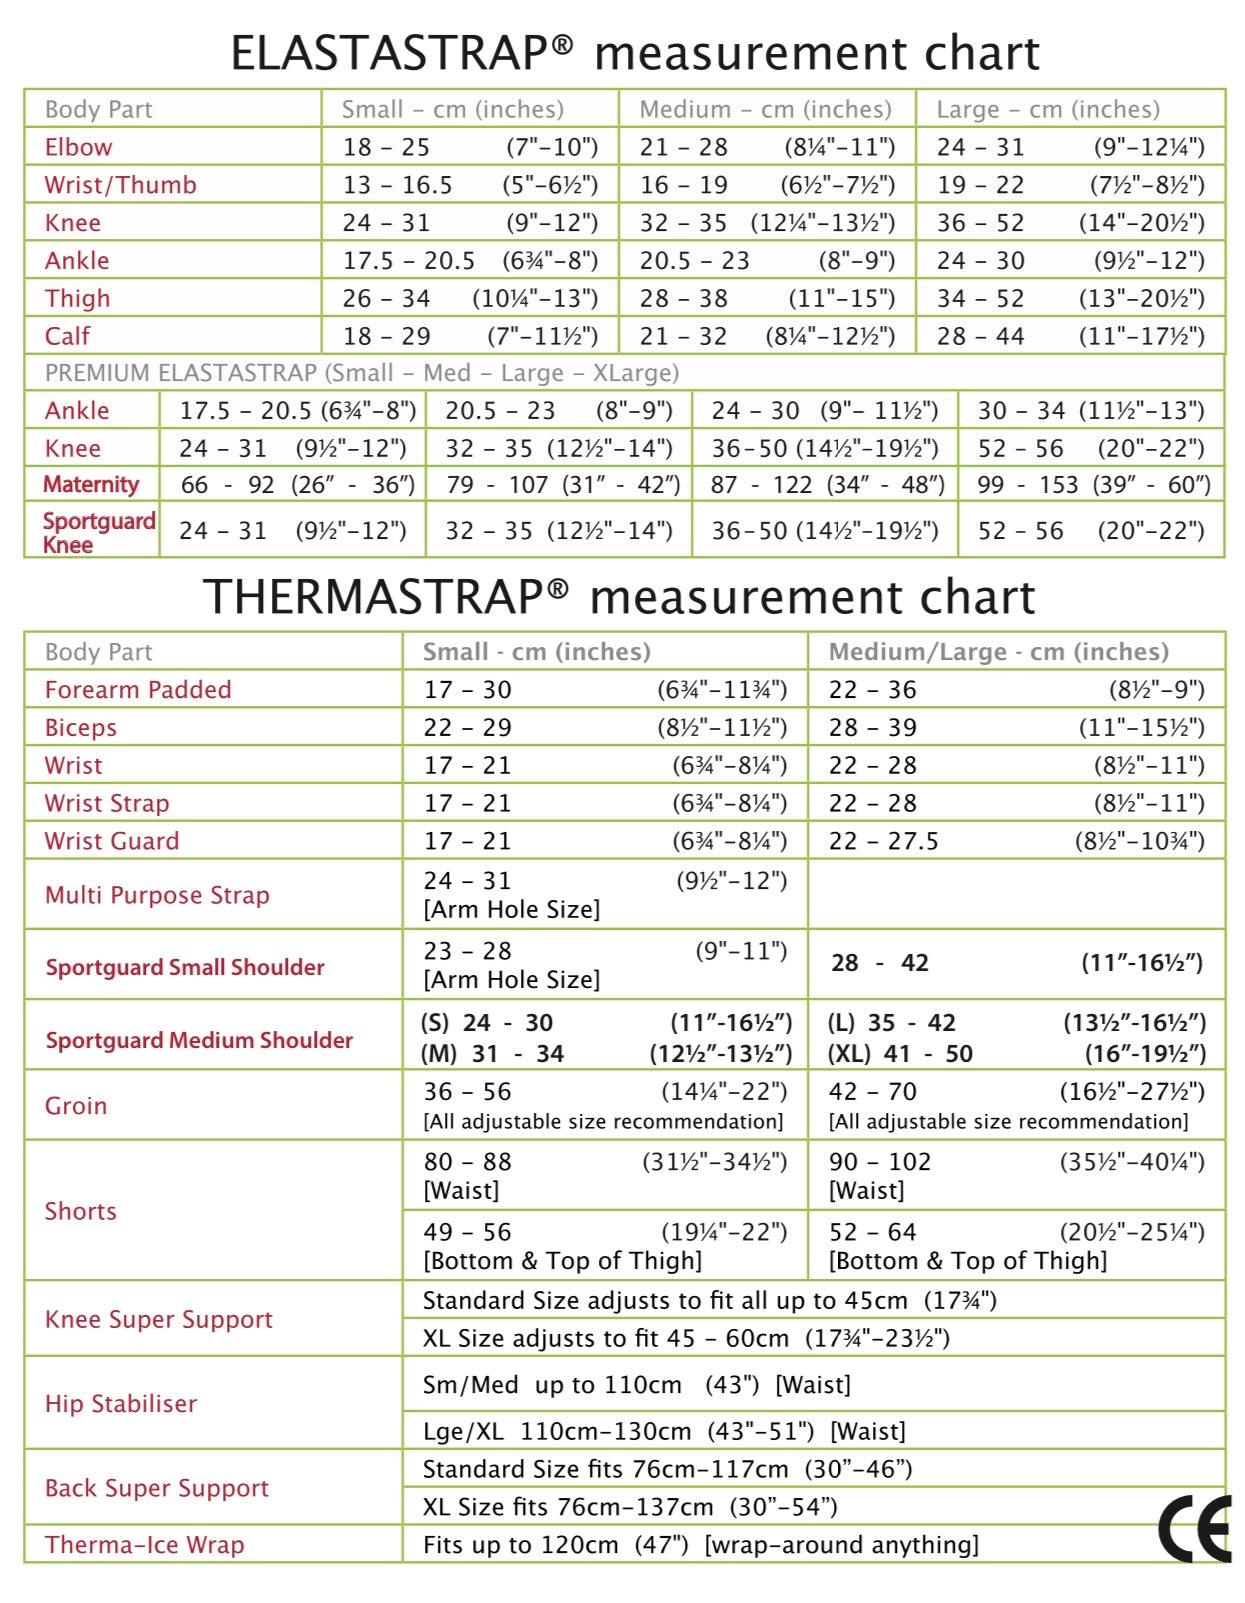 Thermastrap SUPER Ankle Support